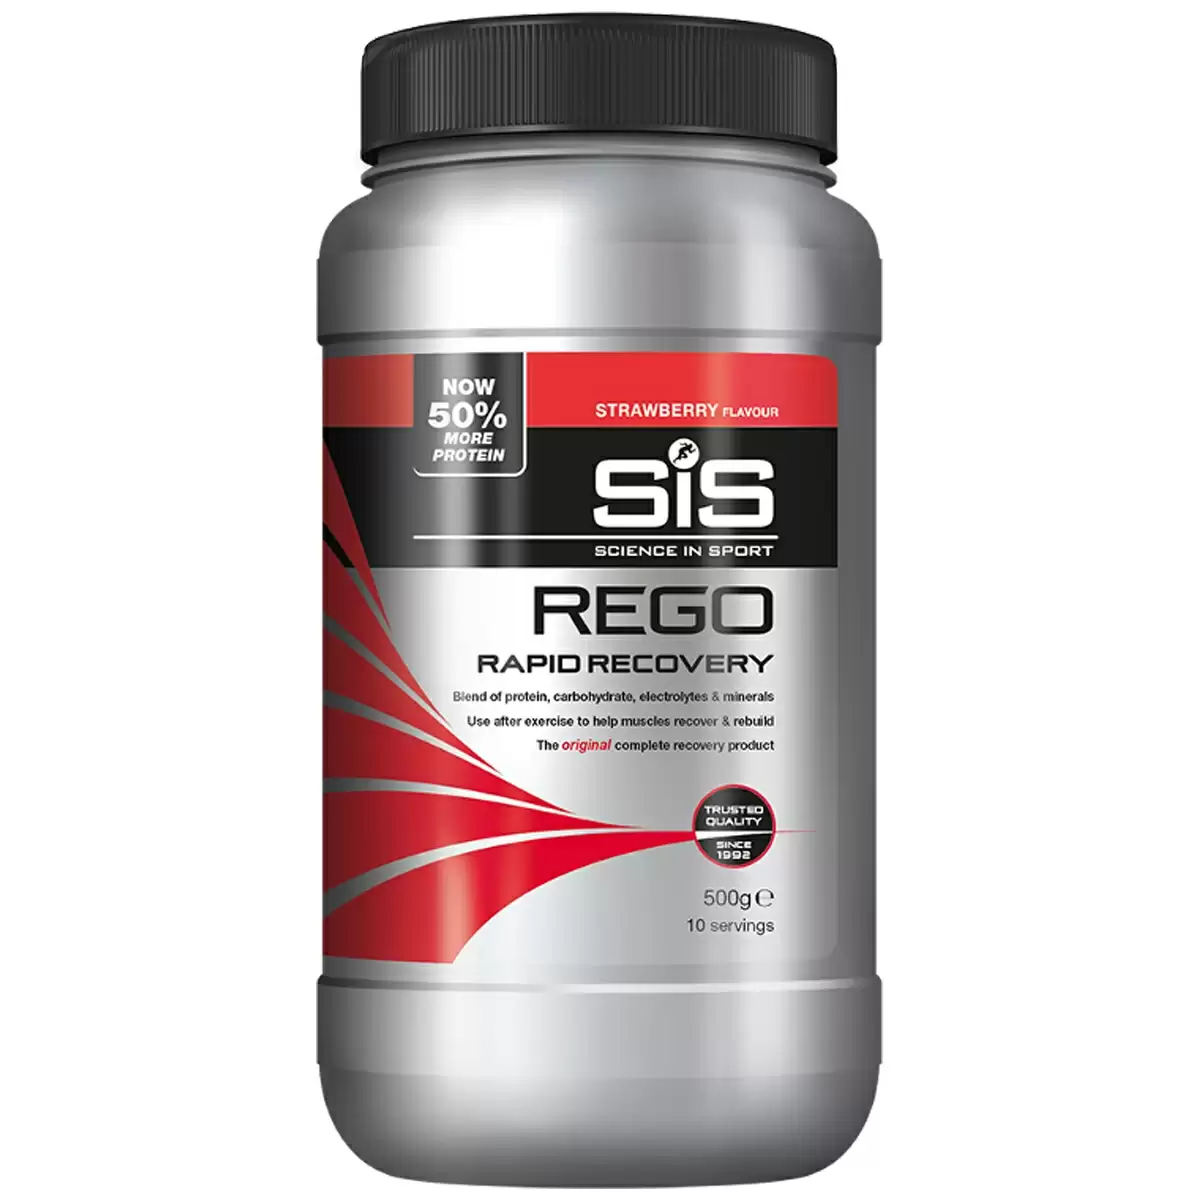 Rego Rapid Recovery Drink Strawberry Flavor 500g - image